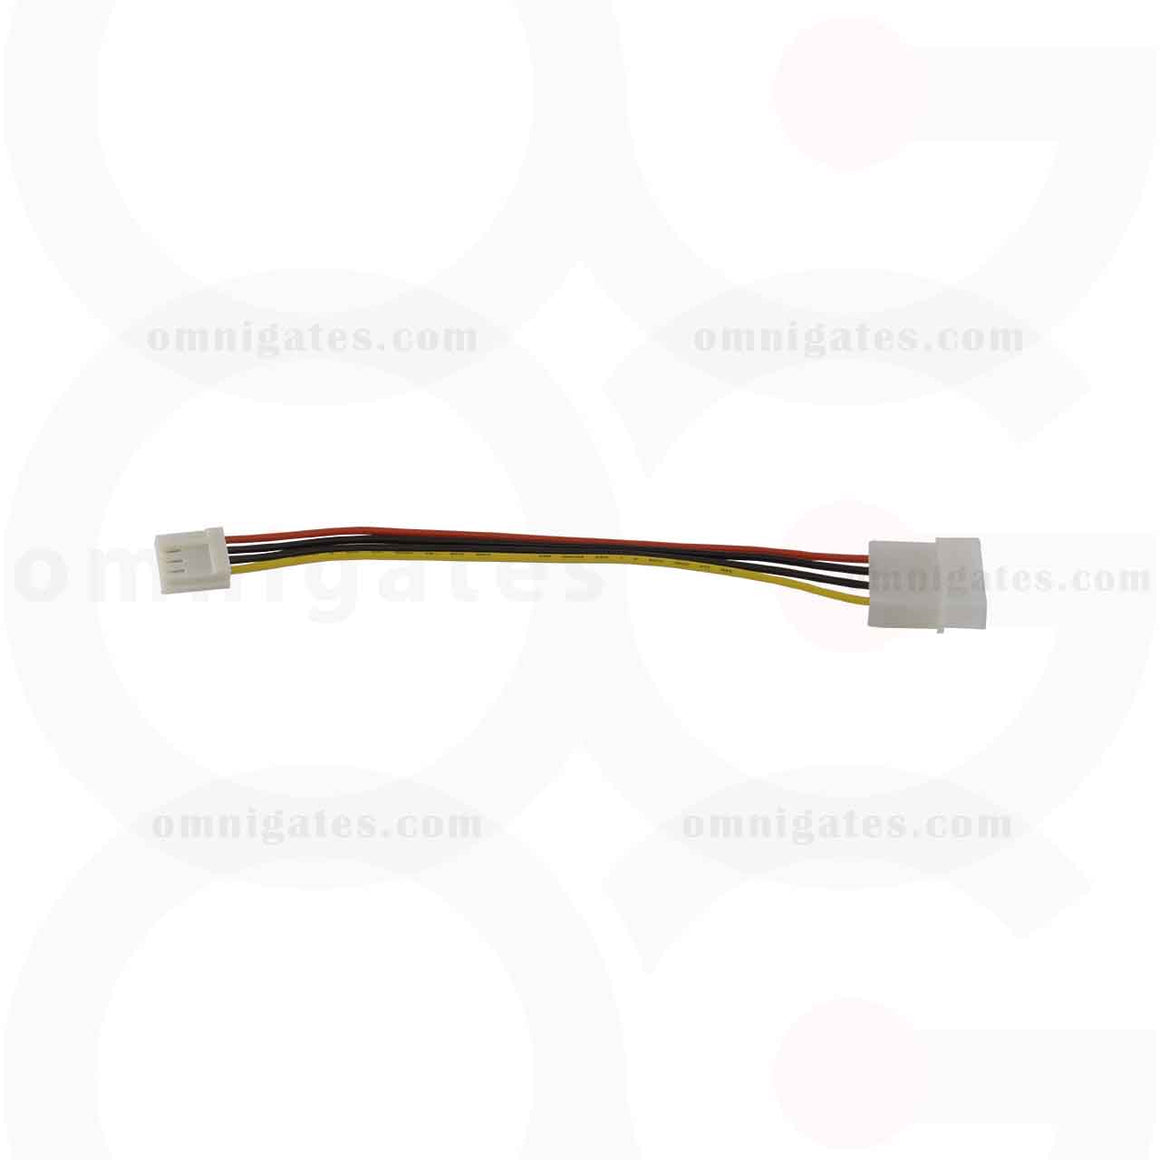 5.25 Male to 3.5 Female, Internal DC Adaptor Cable, 6 inches